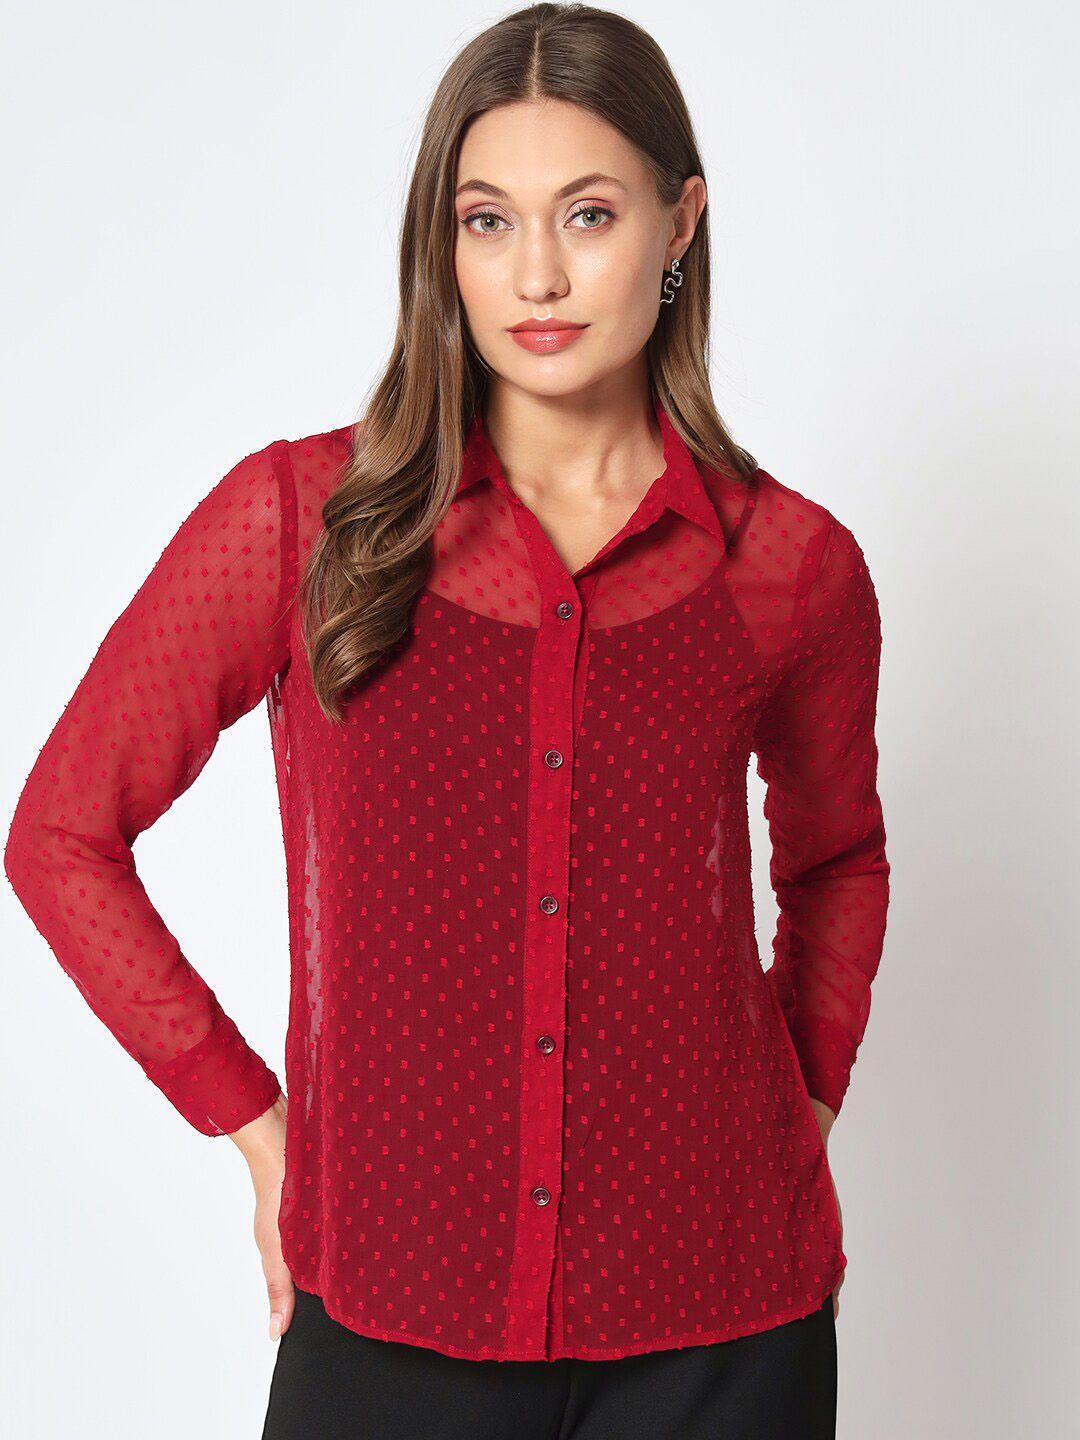 charmgal-classic-fit-slim-fit-self-design-georgette-casual-shirt